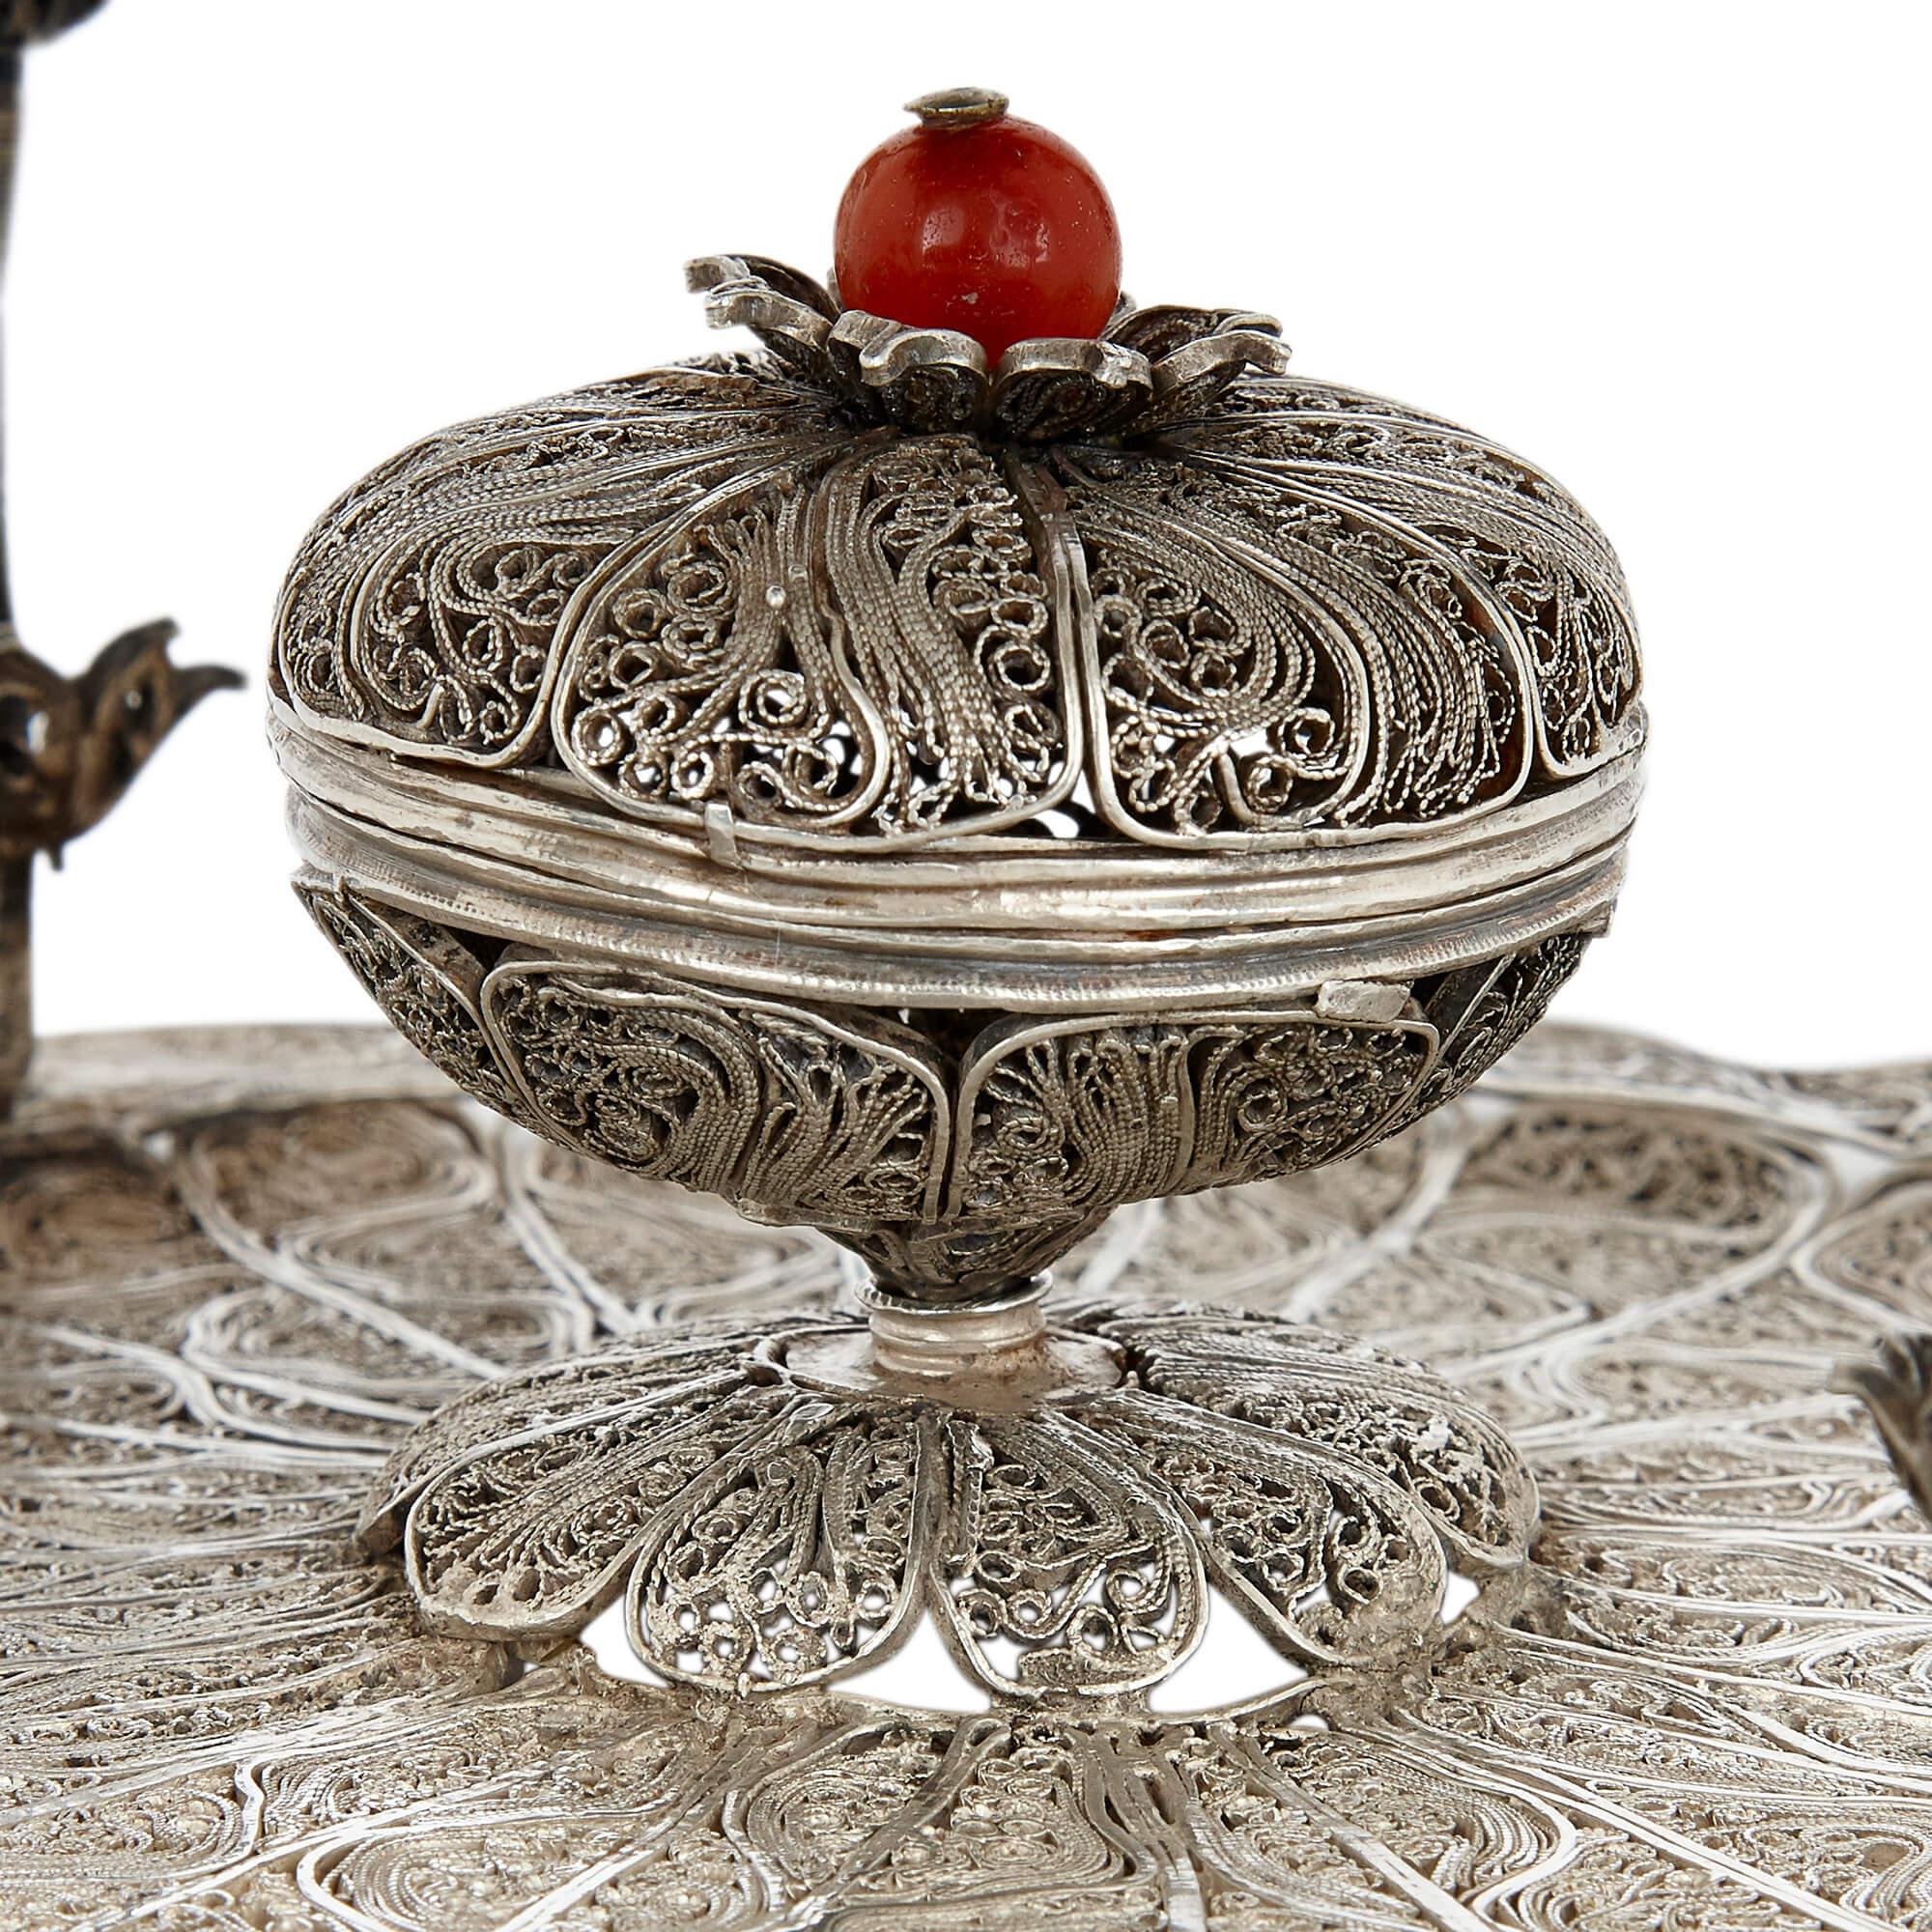 Ottoman Filigreed Silver and Hardstone Sweets Dish For Sale 1